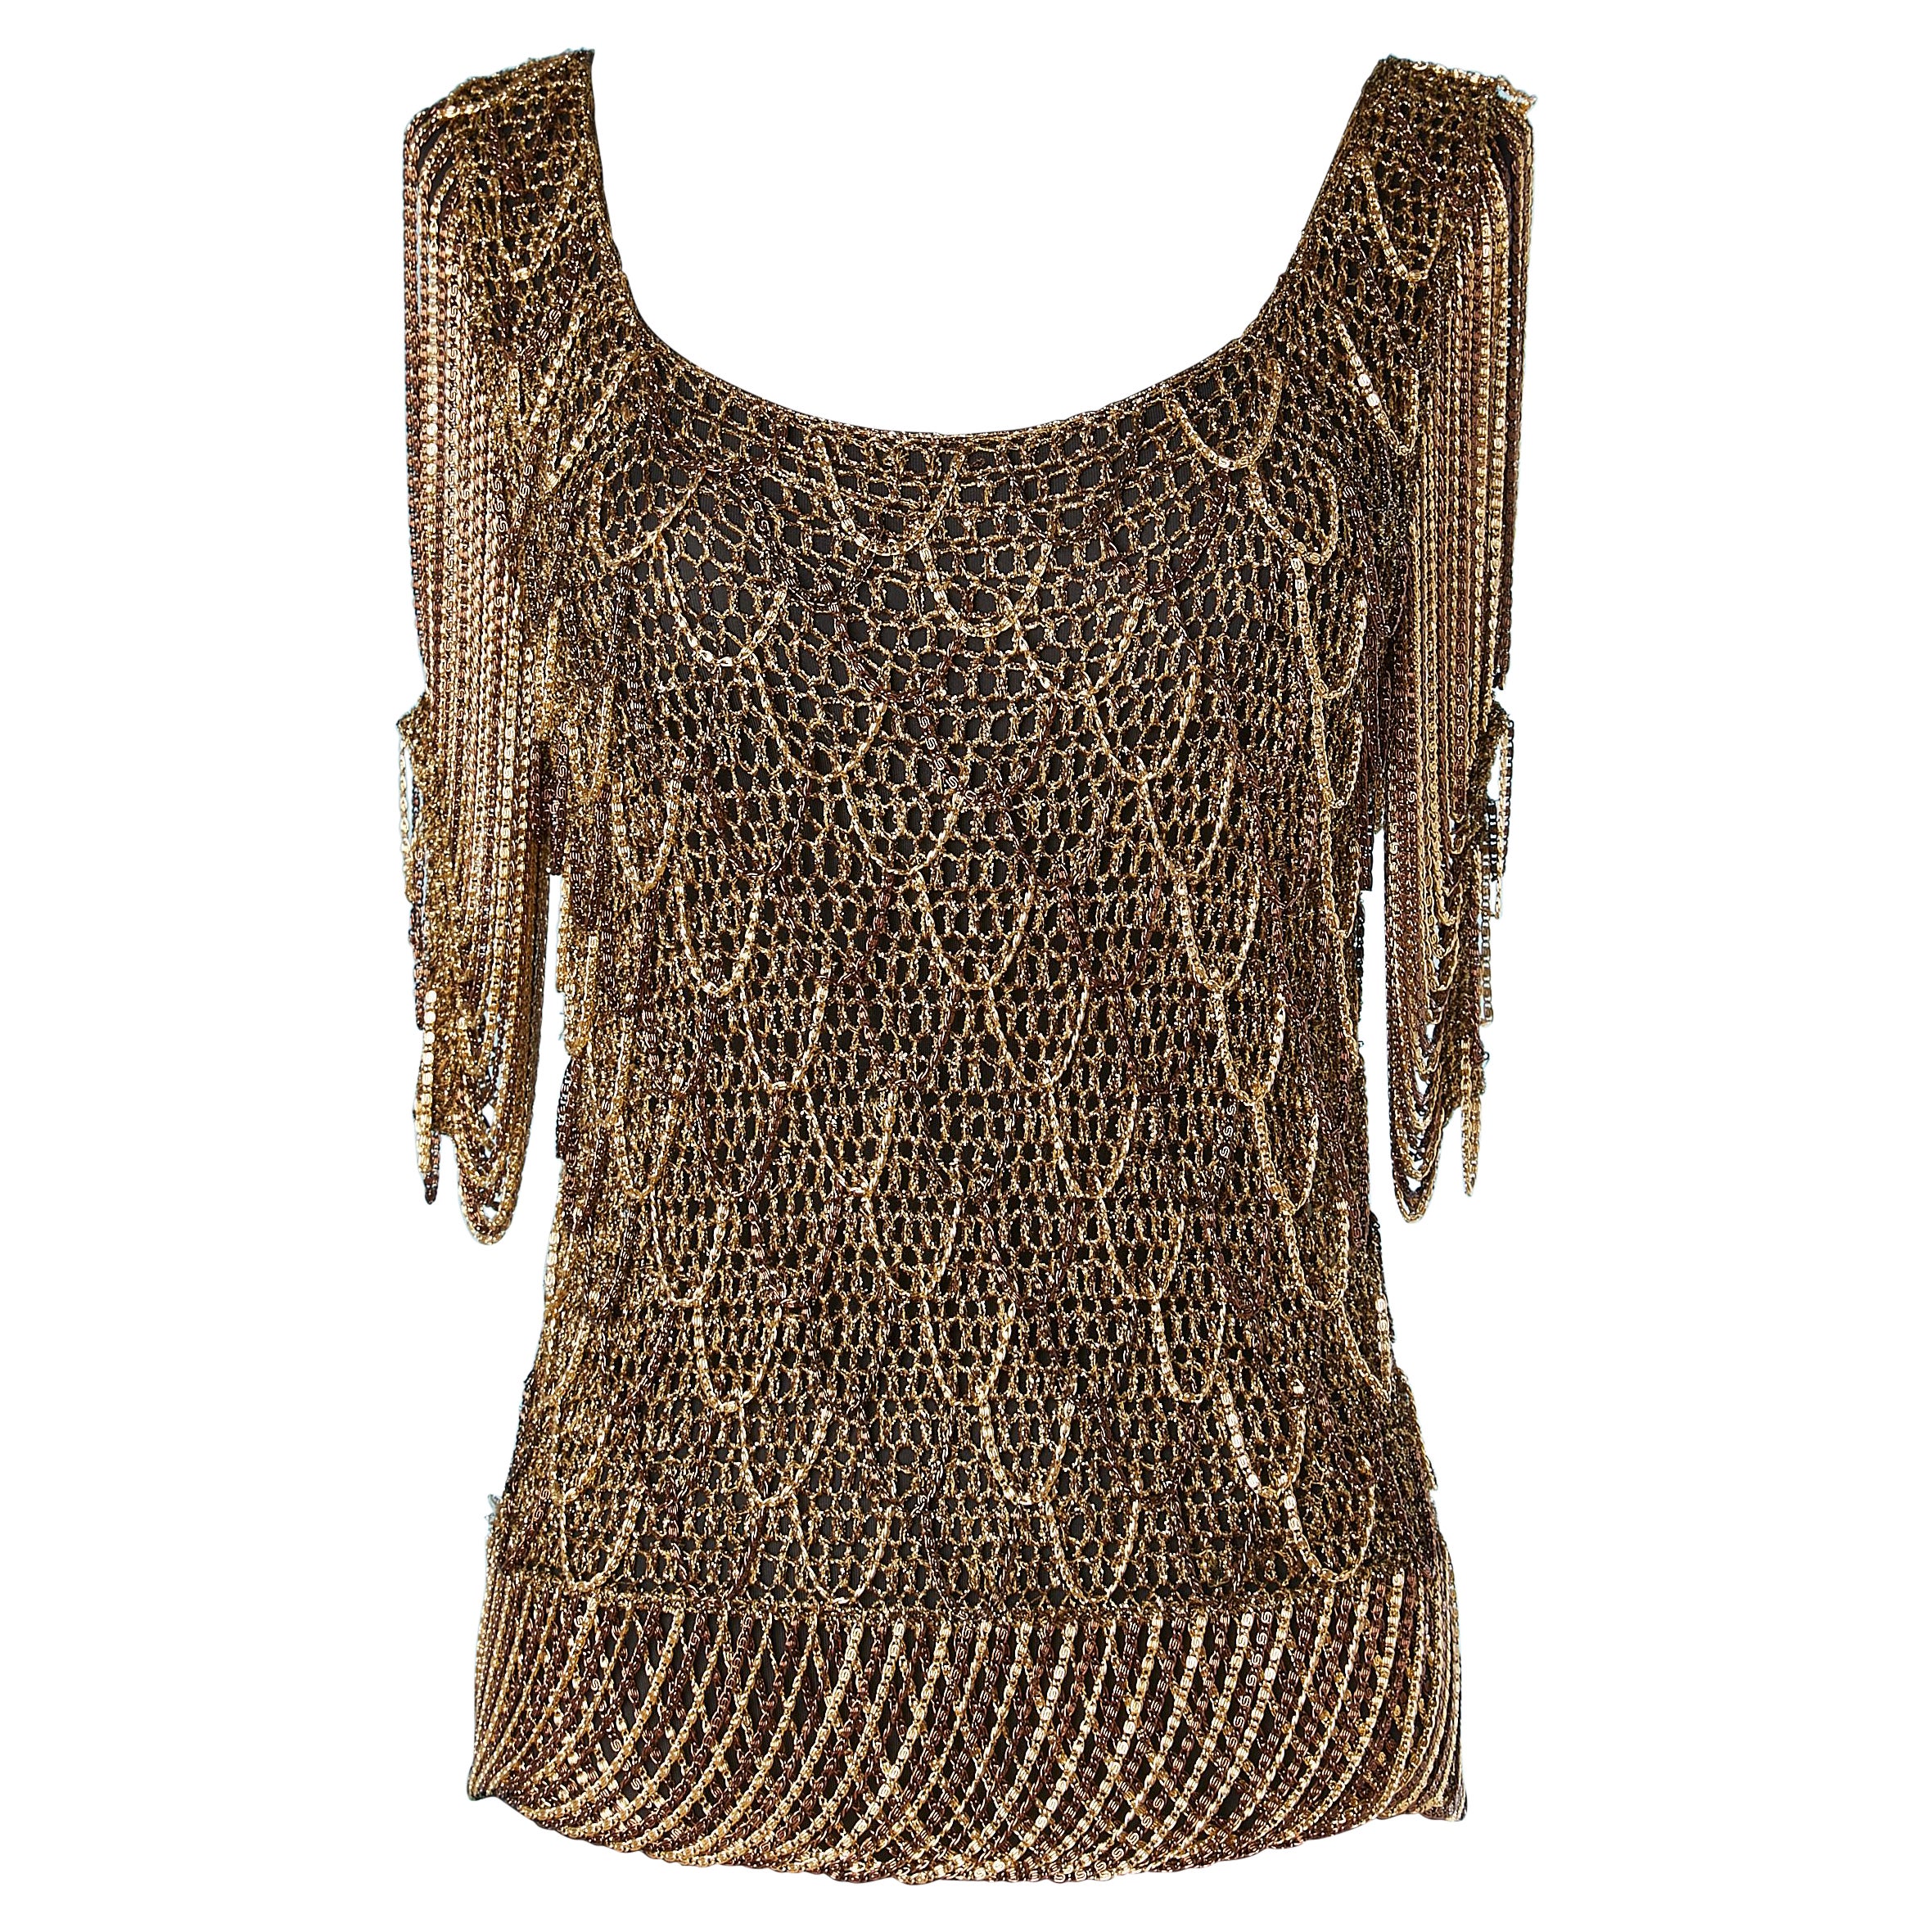 Woven gold and copper tone chain and knit sweater Loris Azzaro 1970's  For Sale